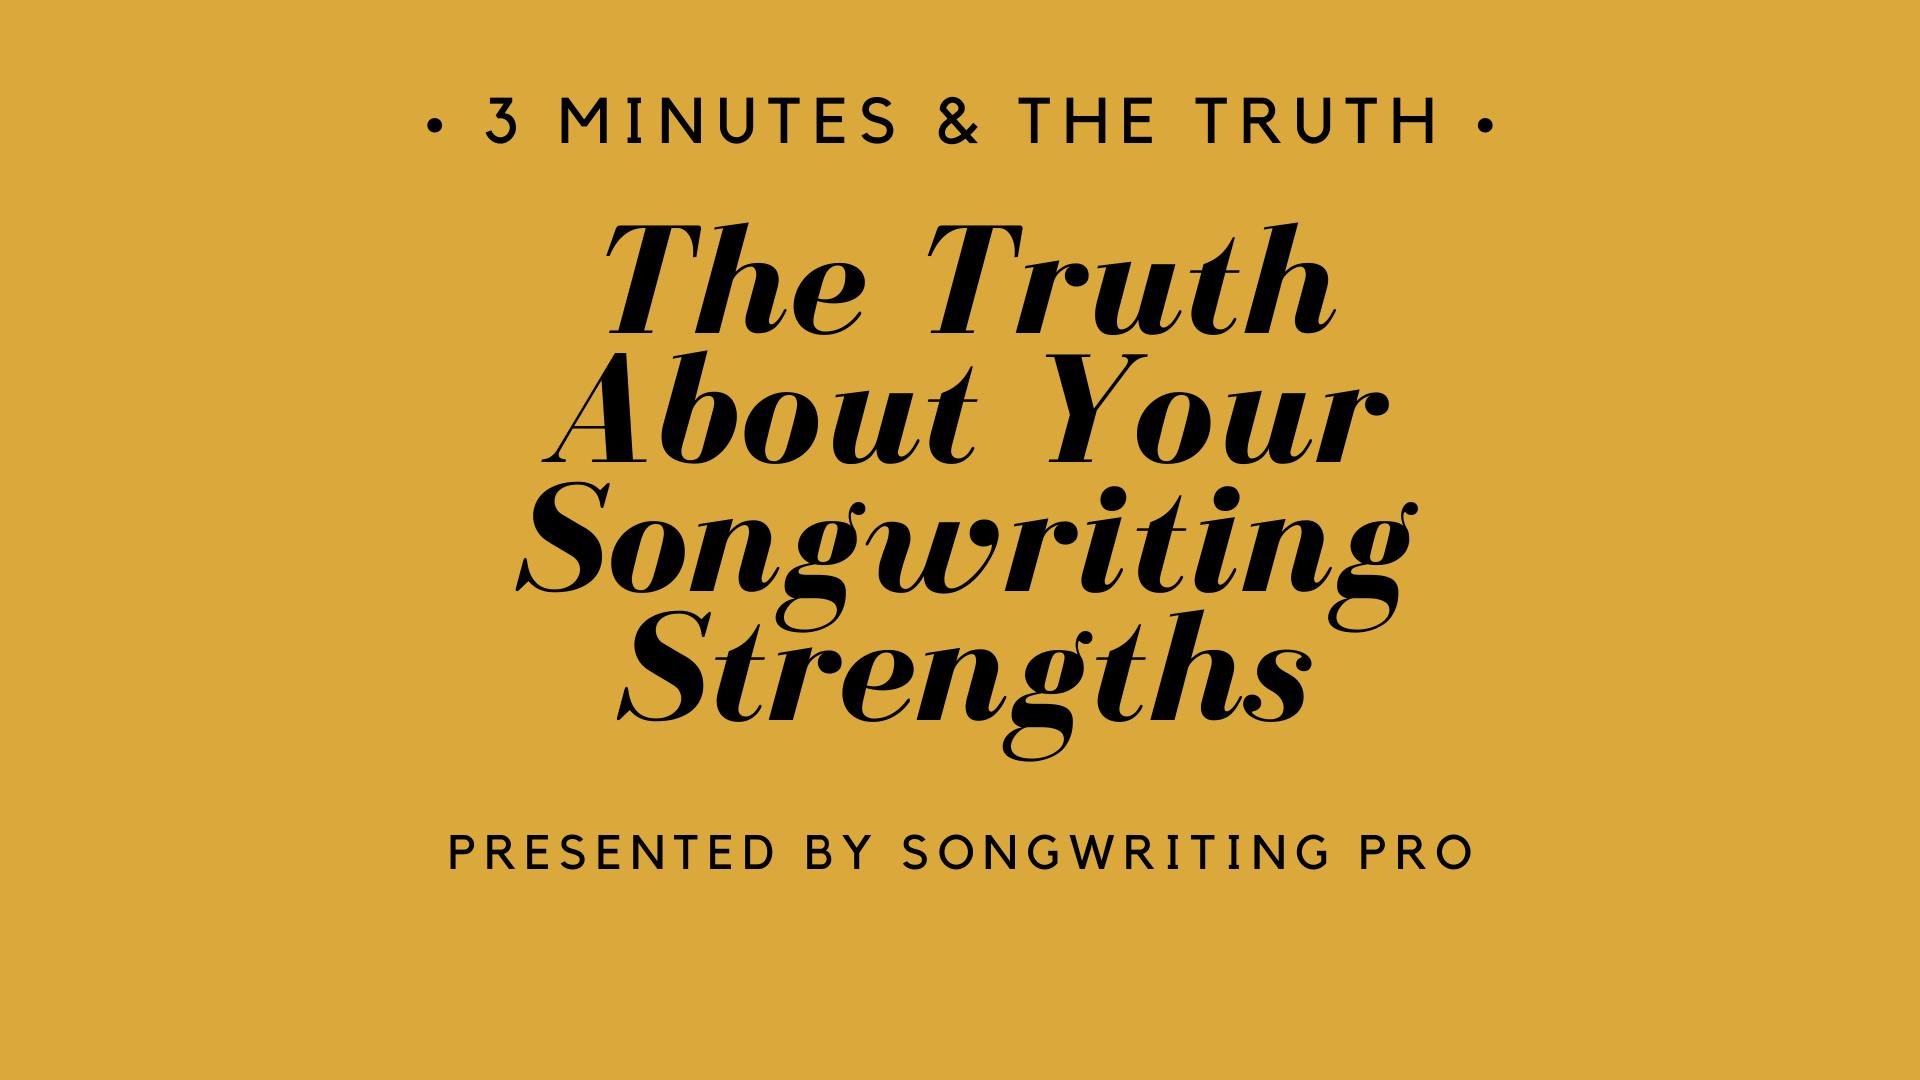 3 Minutes & The Truth: Songwriting Strengths